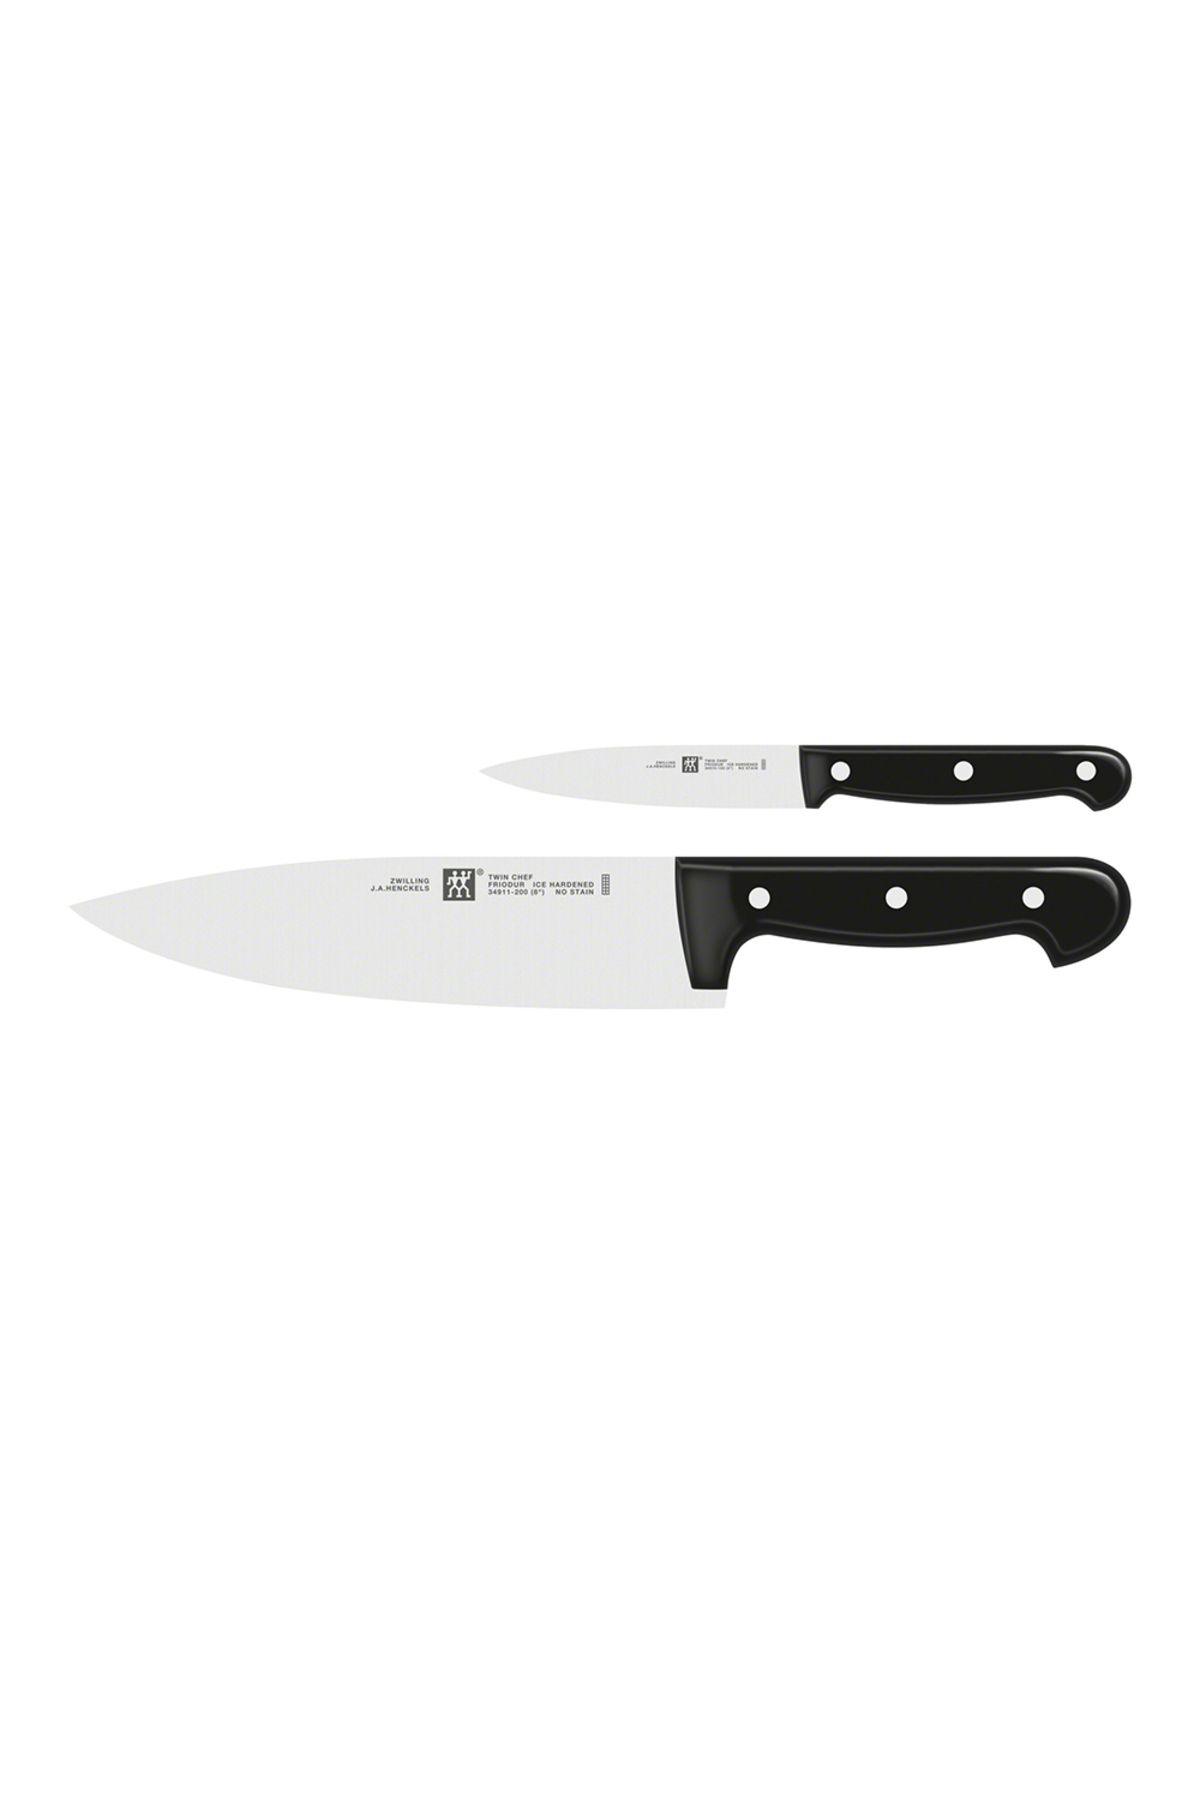 Zwilling 349300050 Twın Chef 2 Set Of Knives,